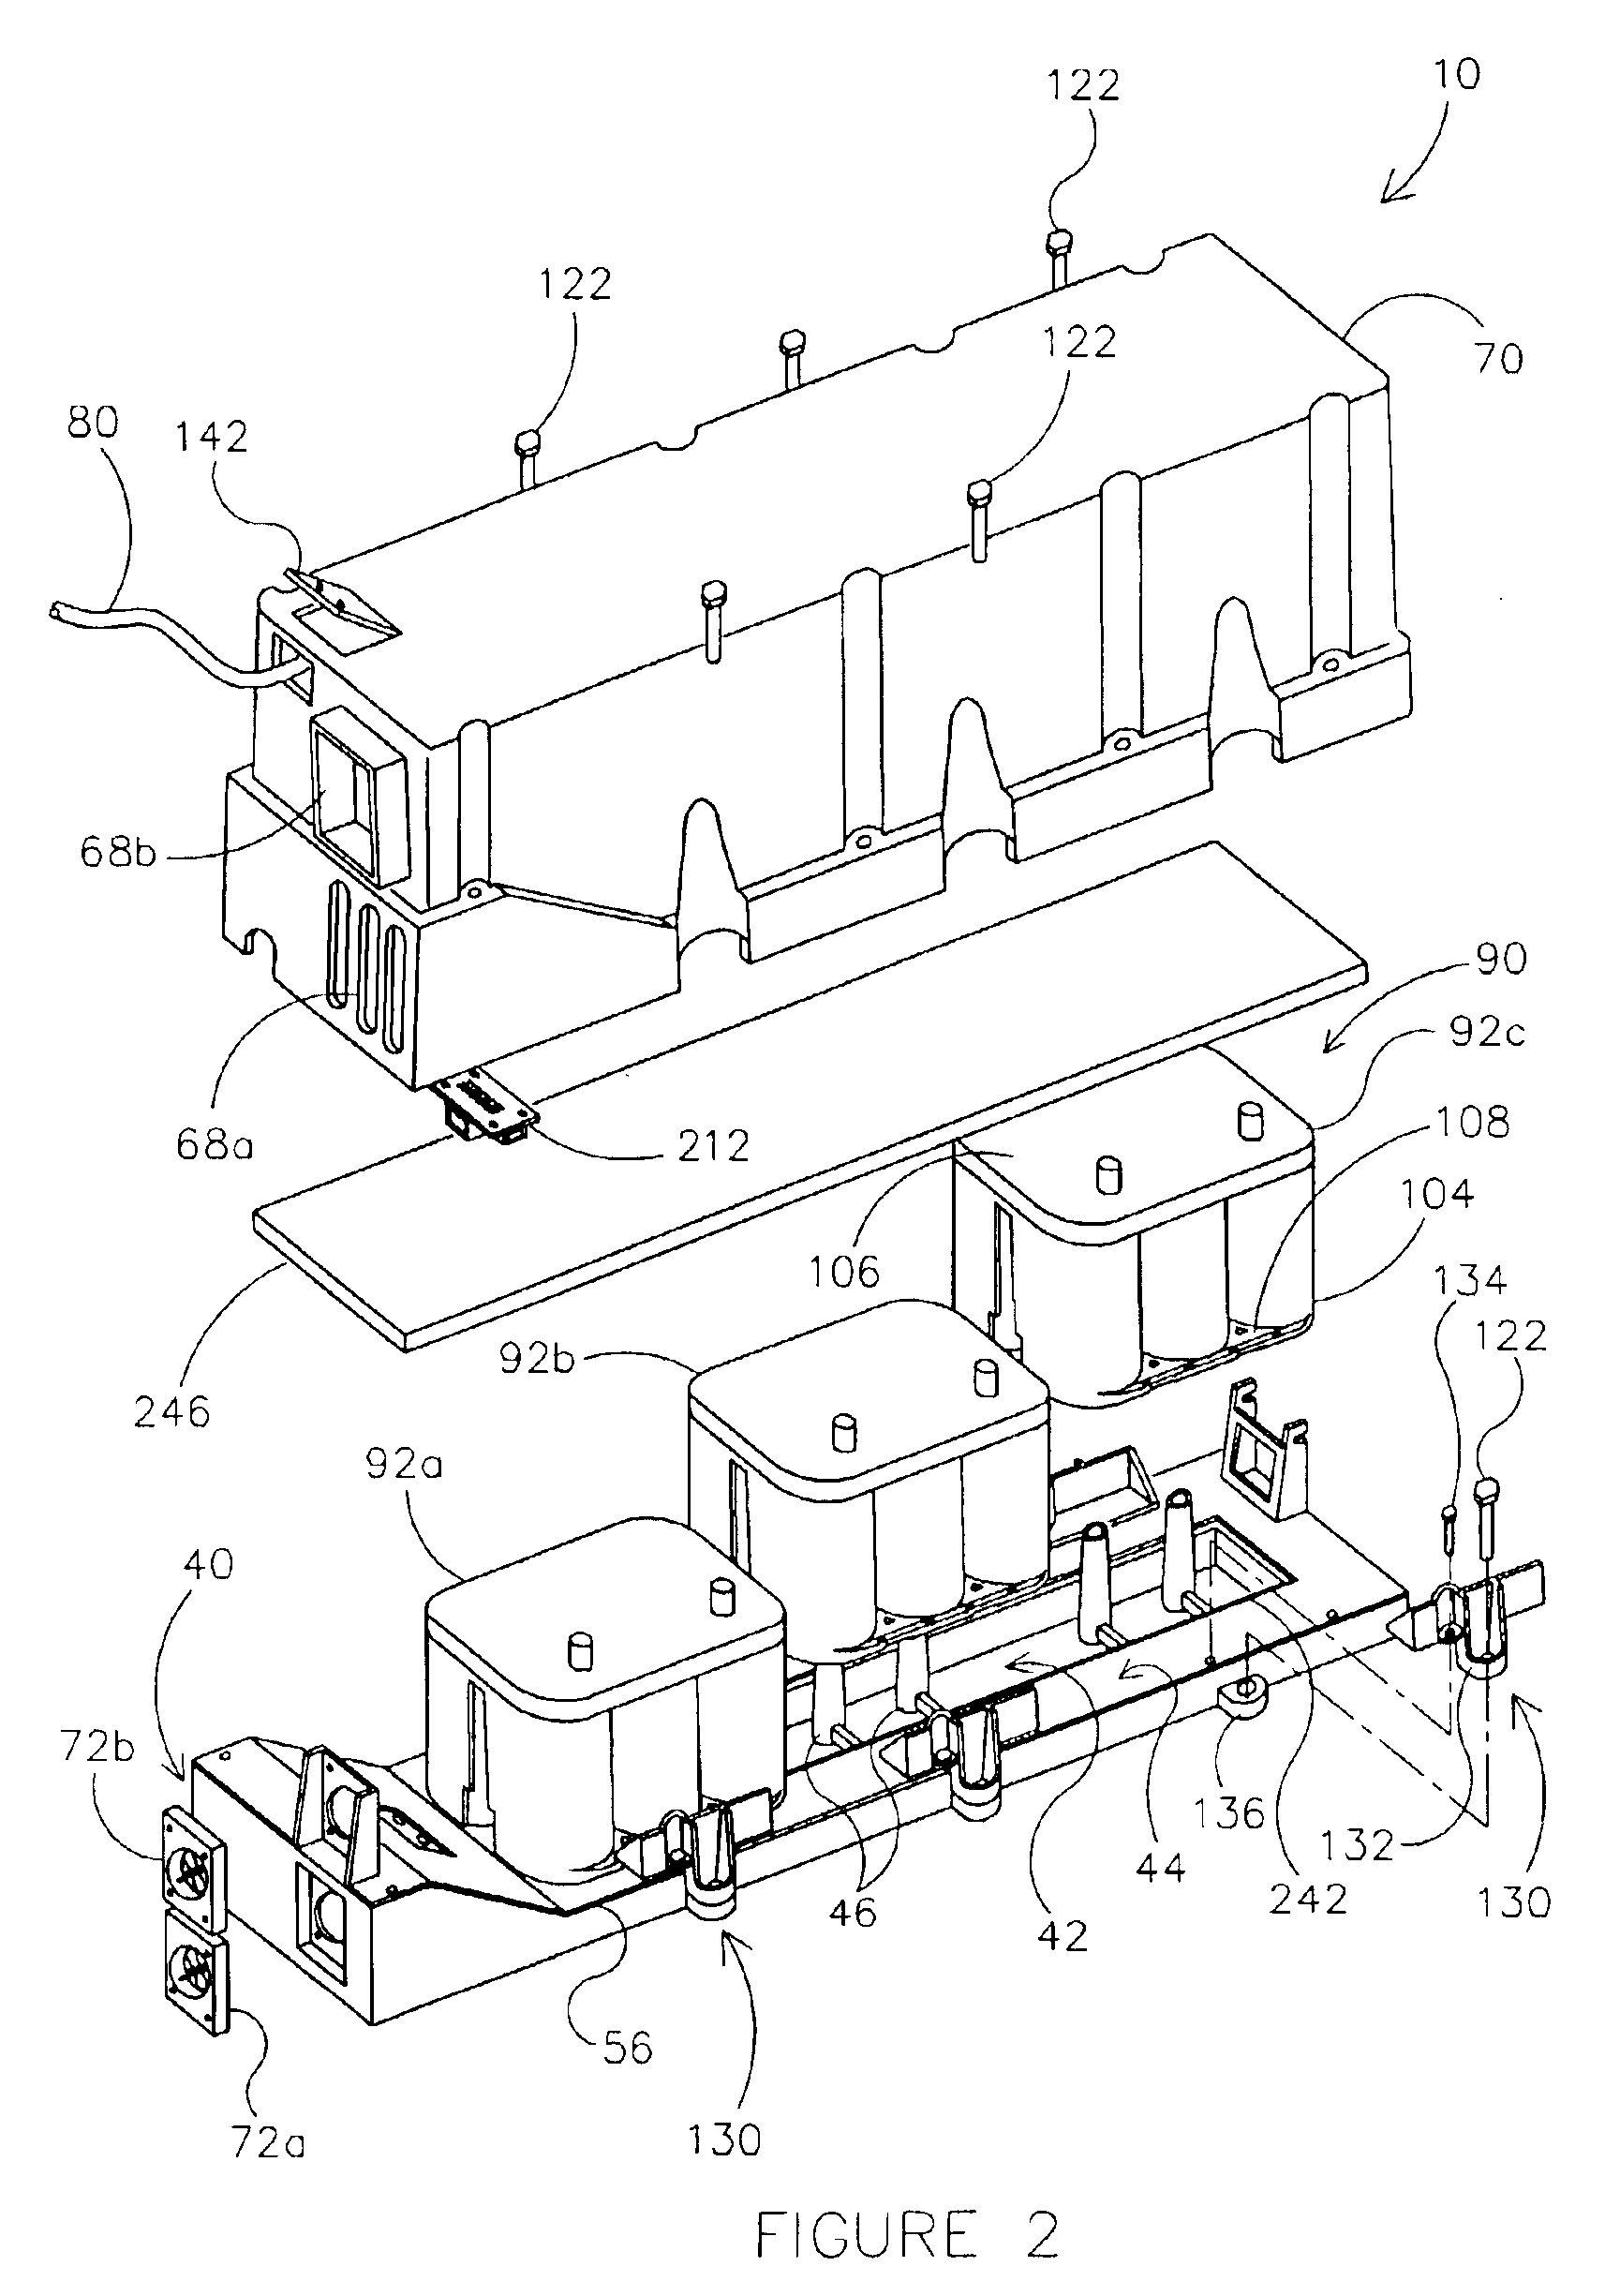 Heat and gas exchange system for battery